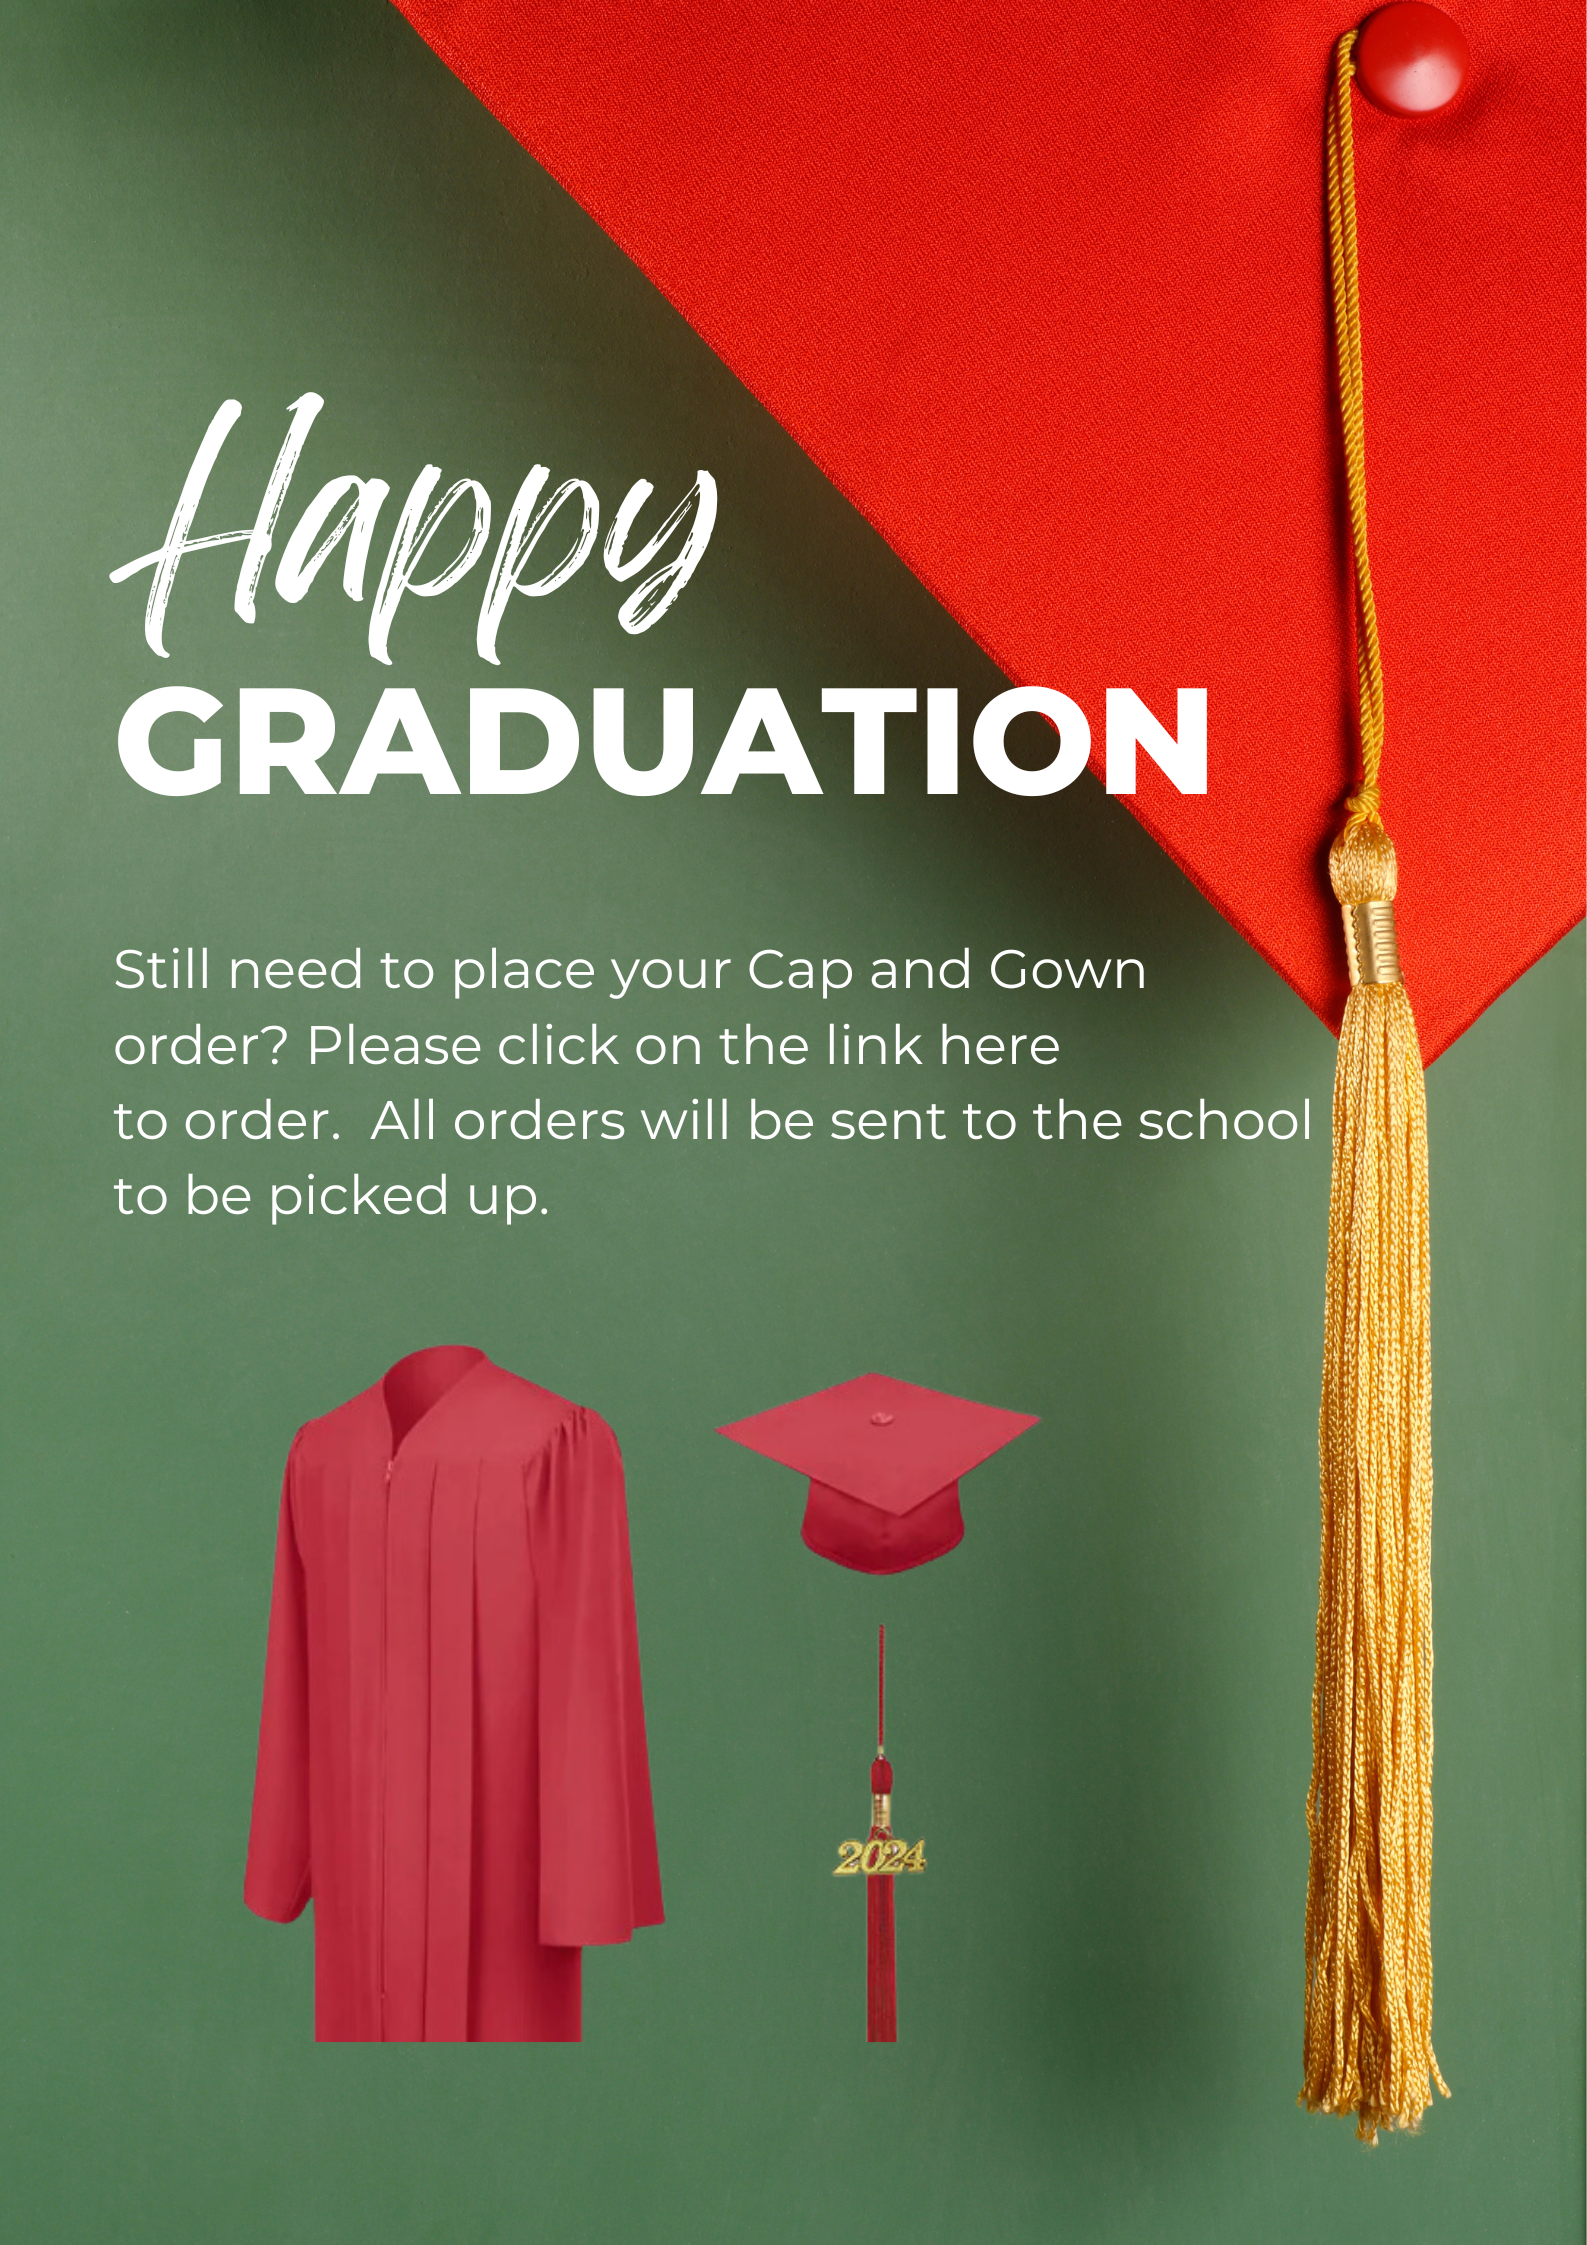 Jostens Cap and Gown